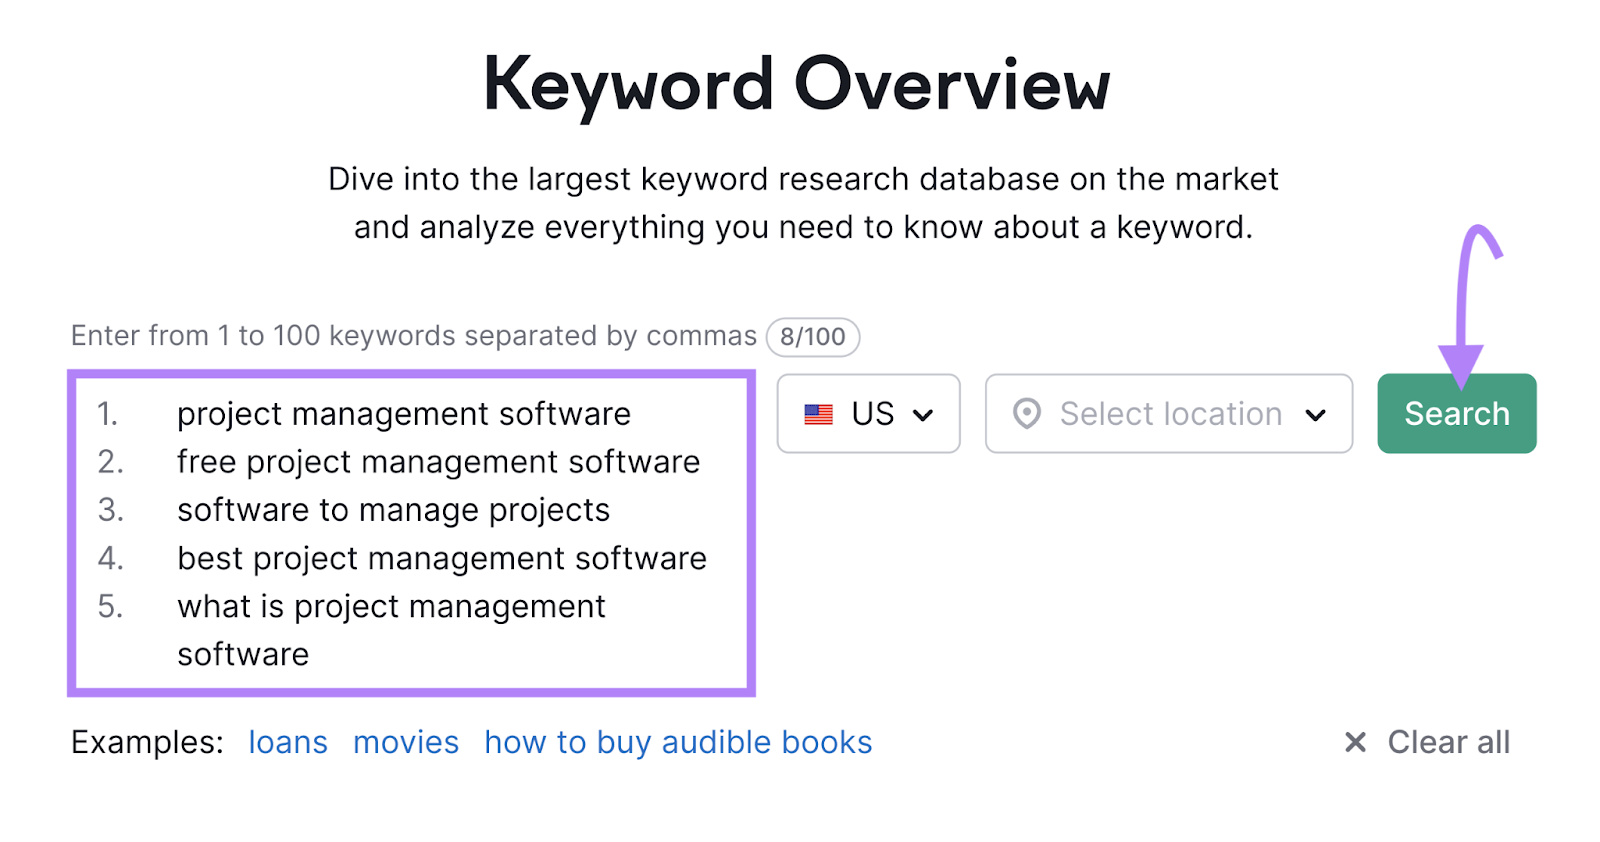 Entering keywords to Keyword Overview tool